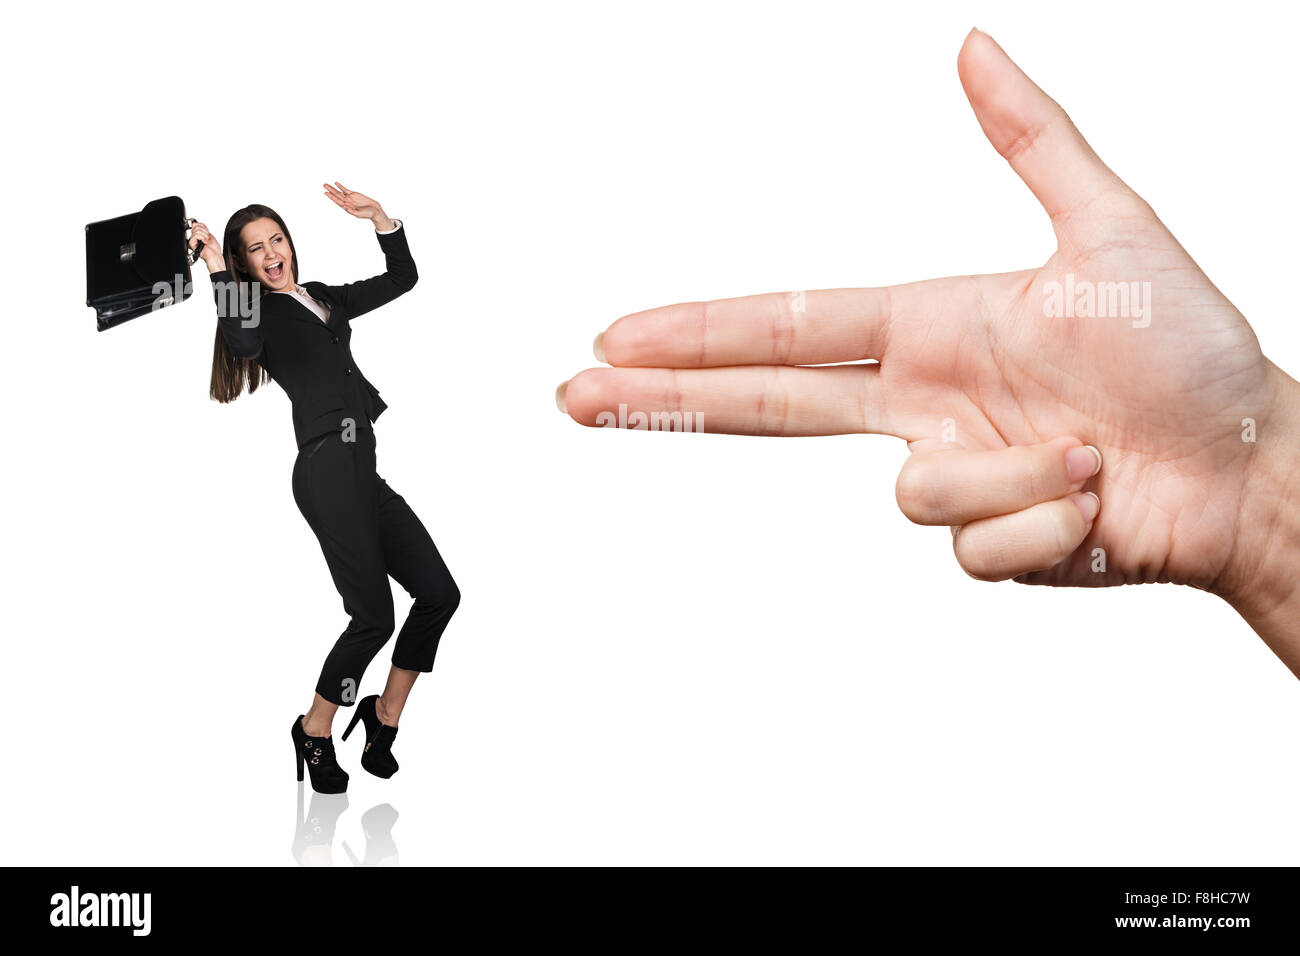 Hand threaten with gun gesture young woman Stock Photo